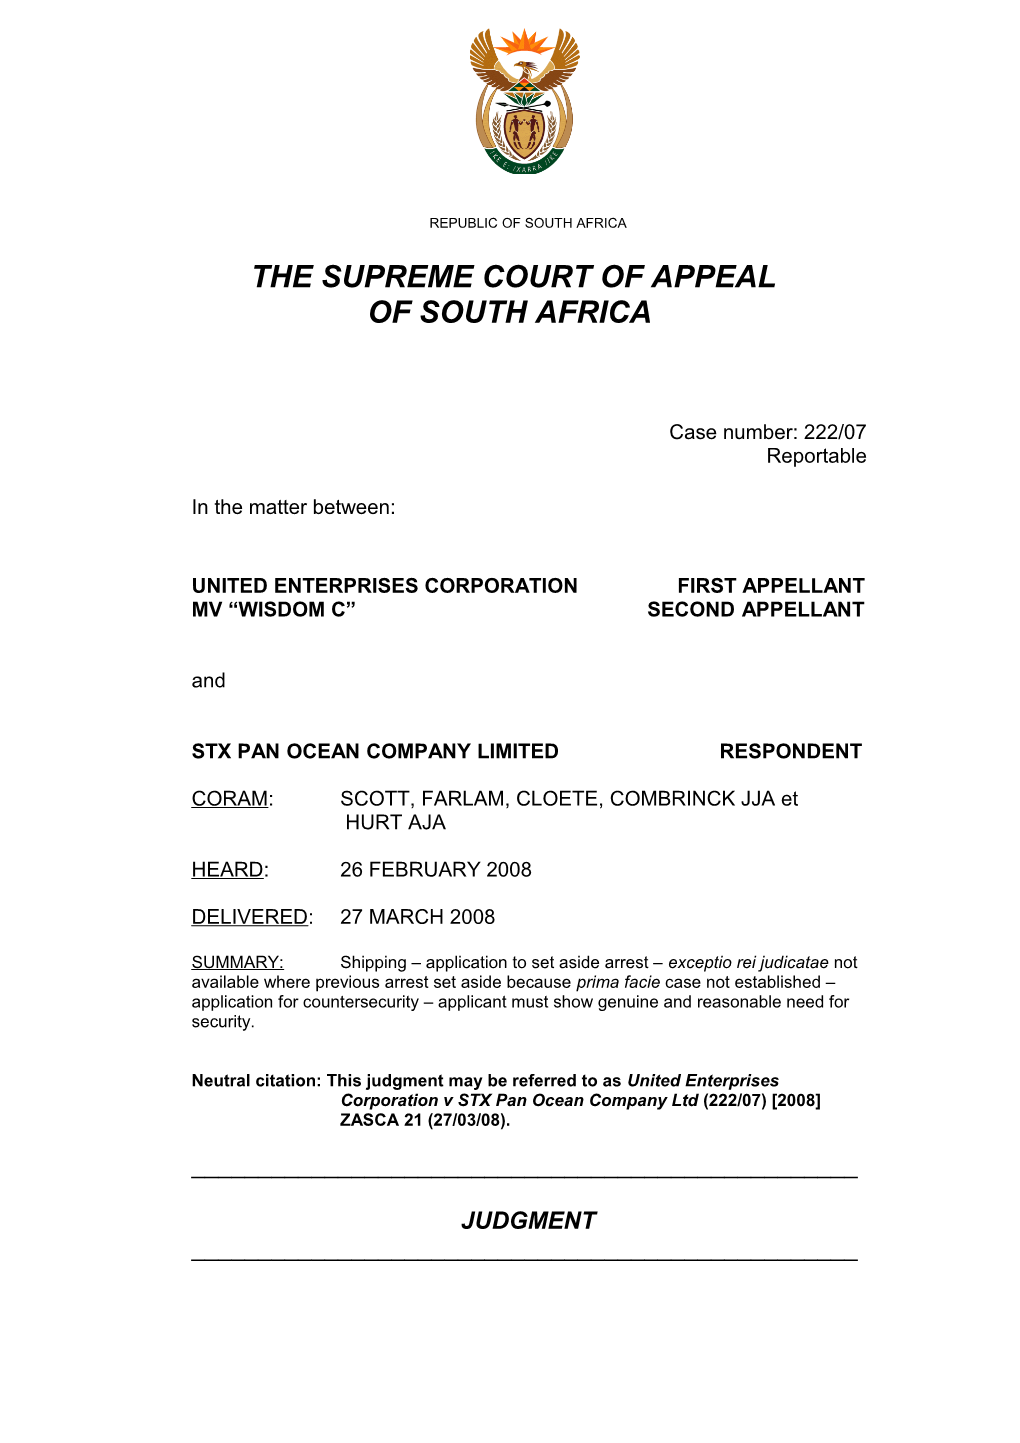 The Supreme Court of Appeal s1